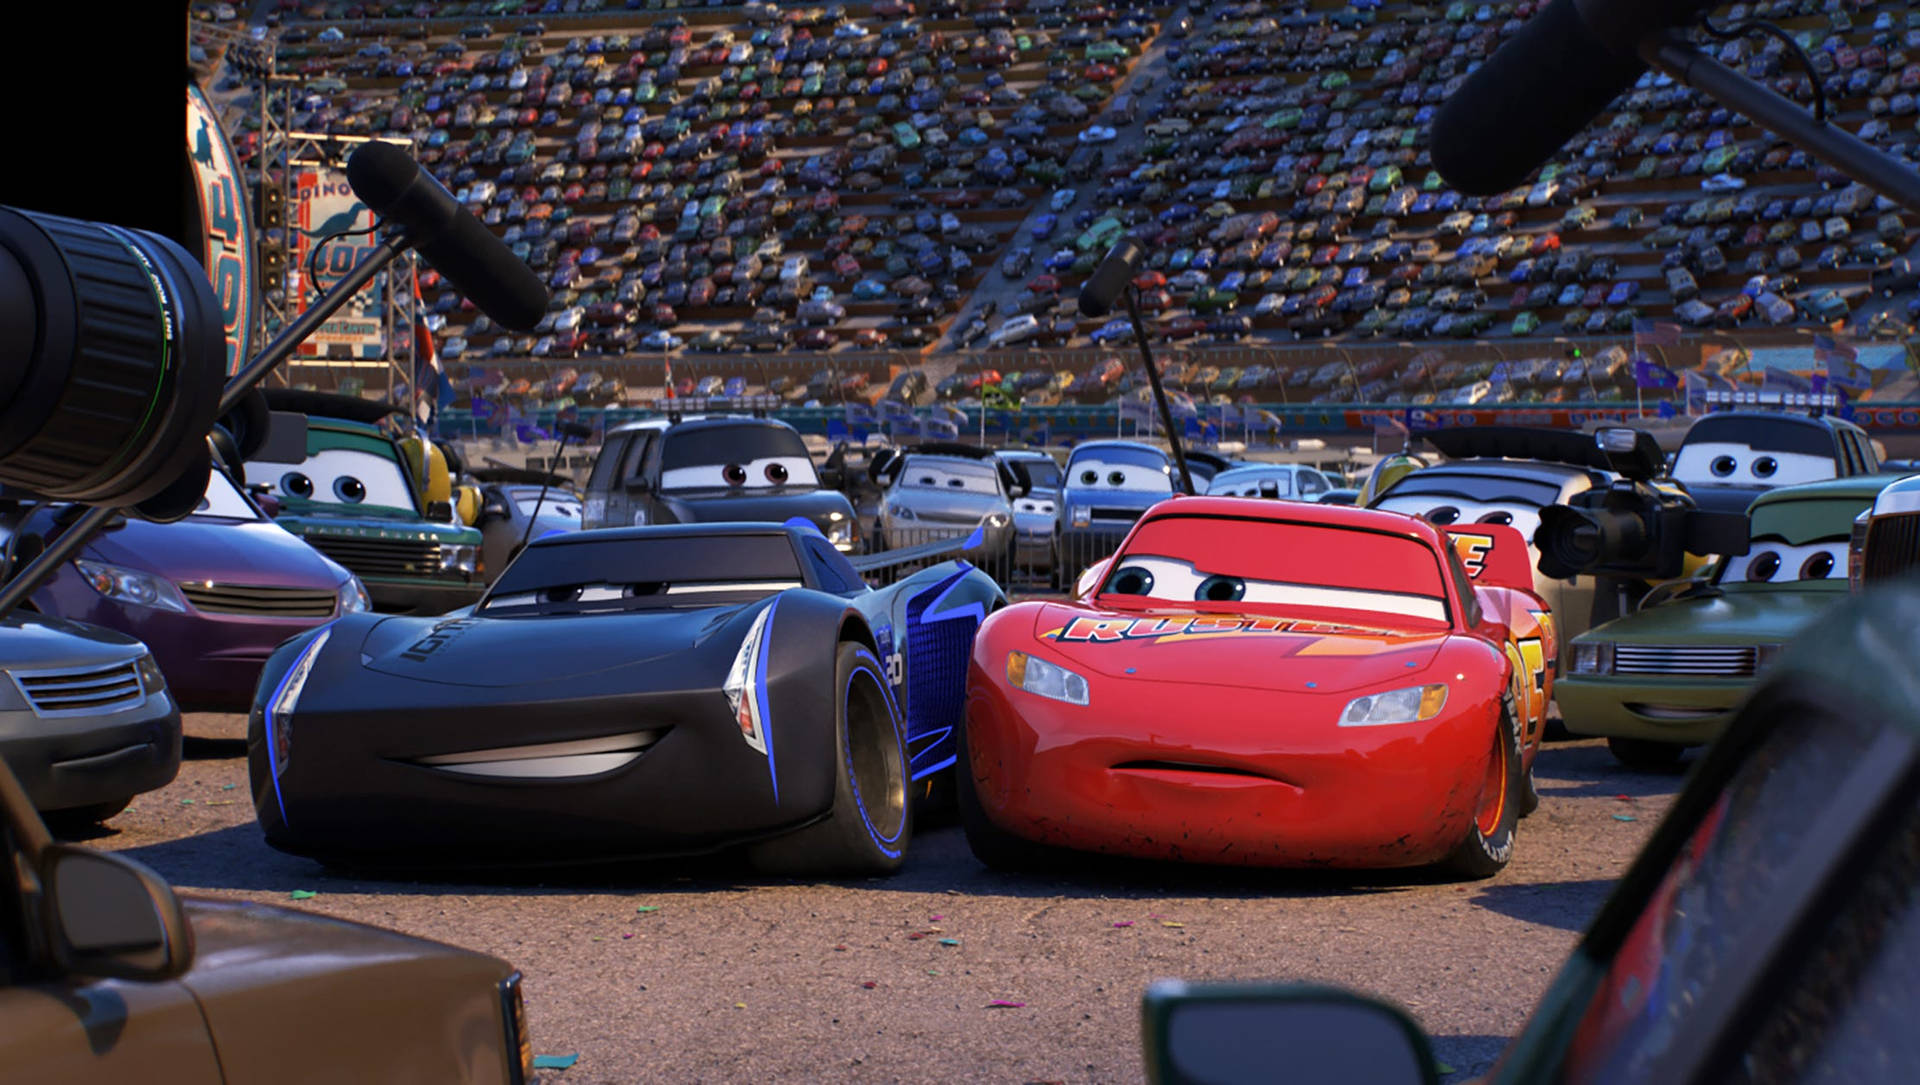 Lightning And Jackson Interview Cars 3 Wallpaper